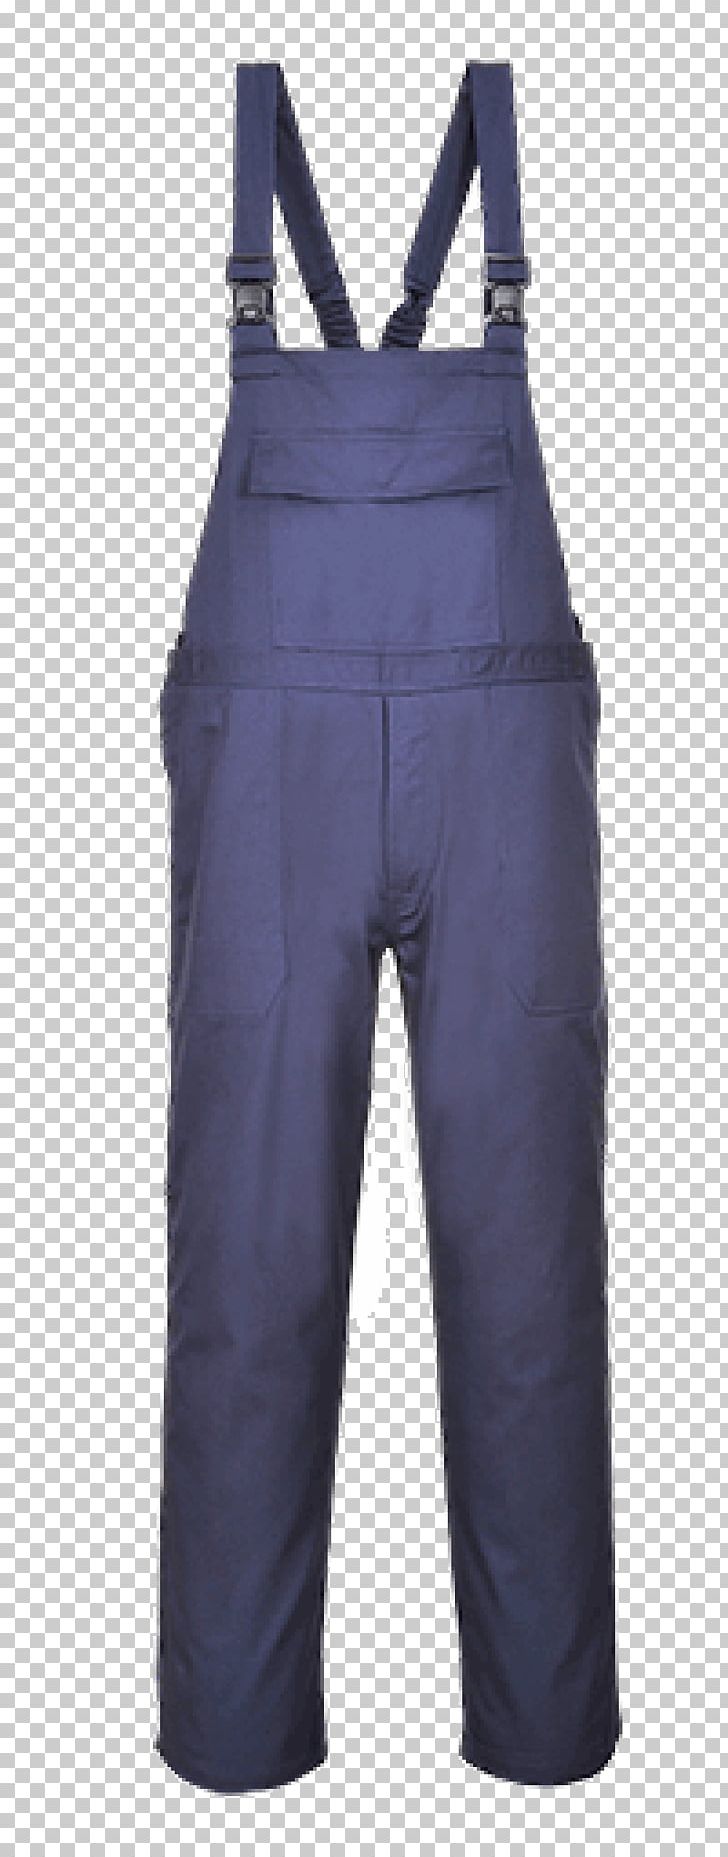 Overall Clothing Pants Bib Workwear PNG, Clipart, Bib, Brace, Braces, Carhartt, Clothing Free PNG Download